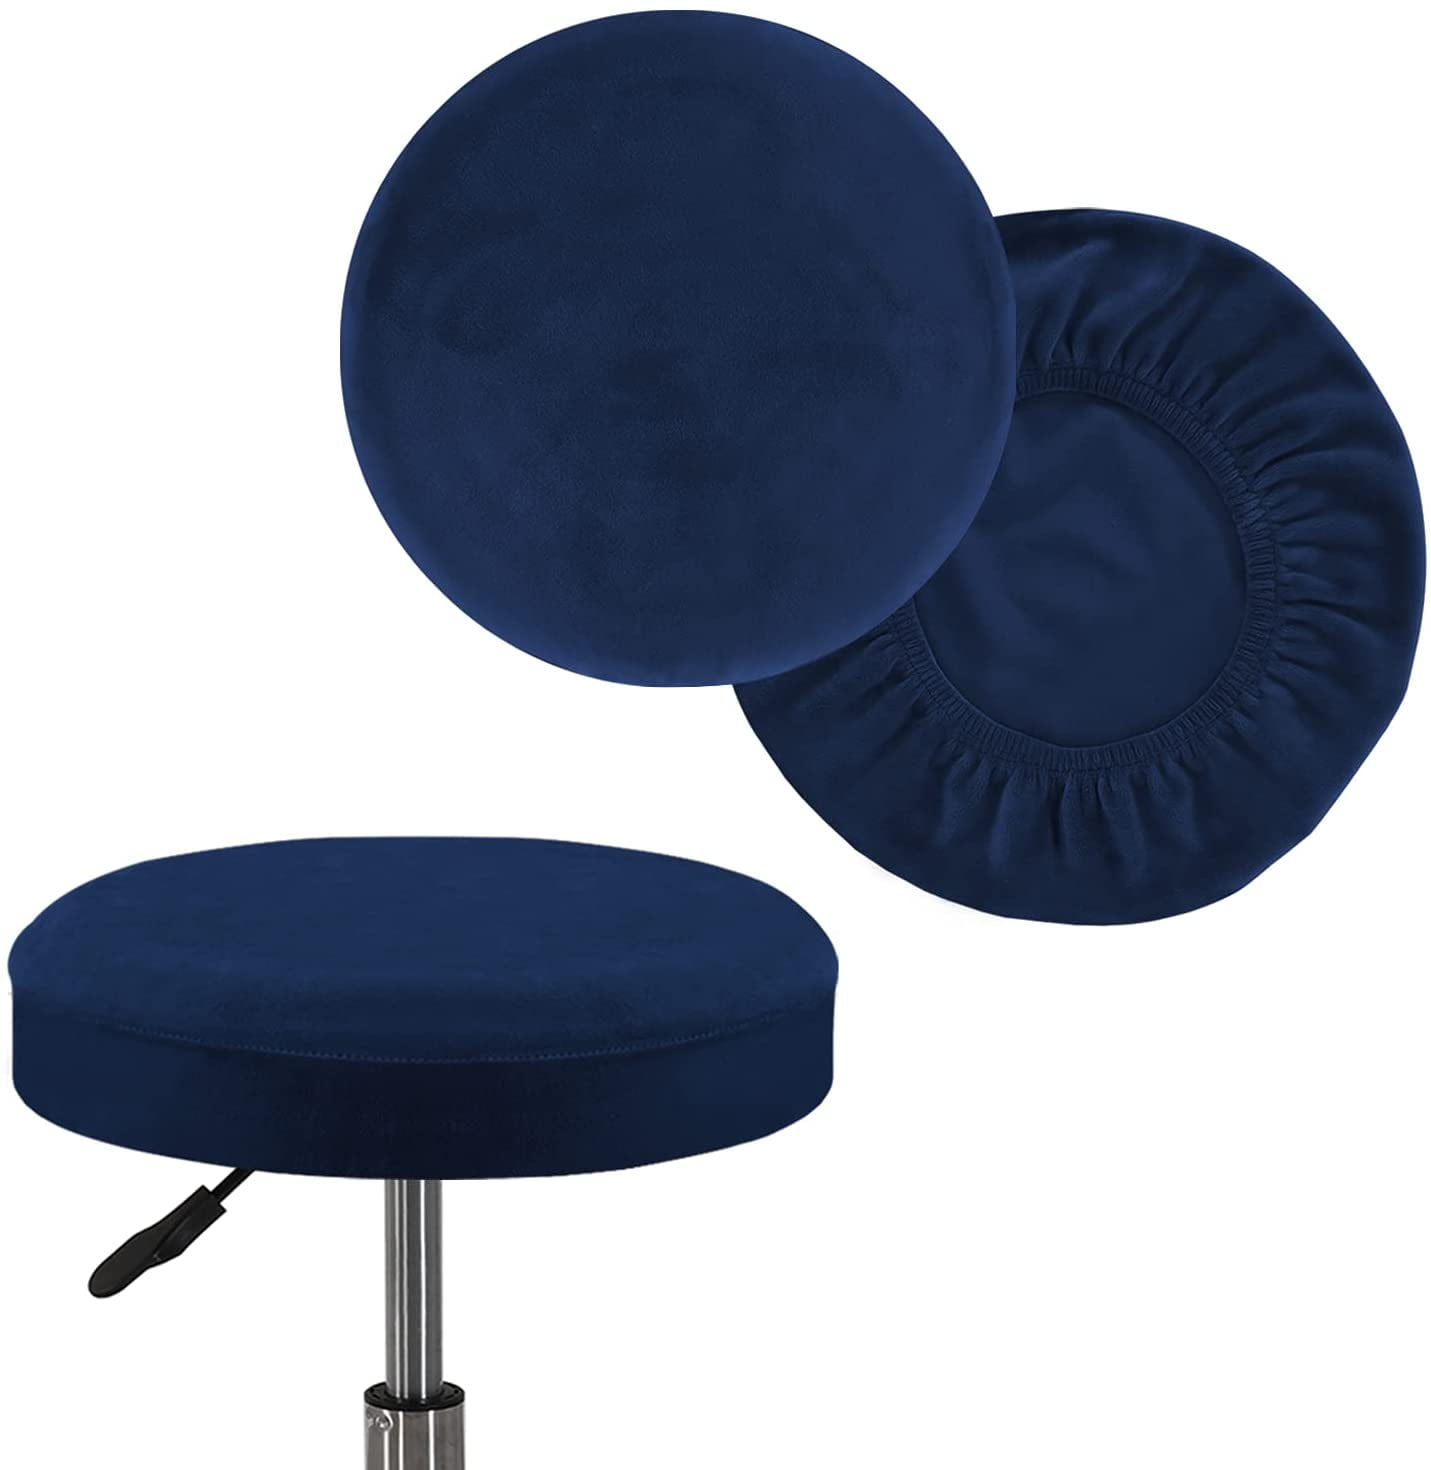 Details about   Home Stool Cover Round Elastic Slipcover Chair Protector Seat Cushion PU Leather 